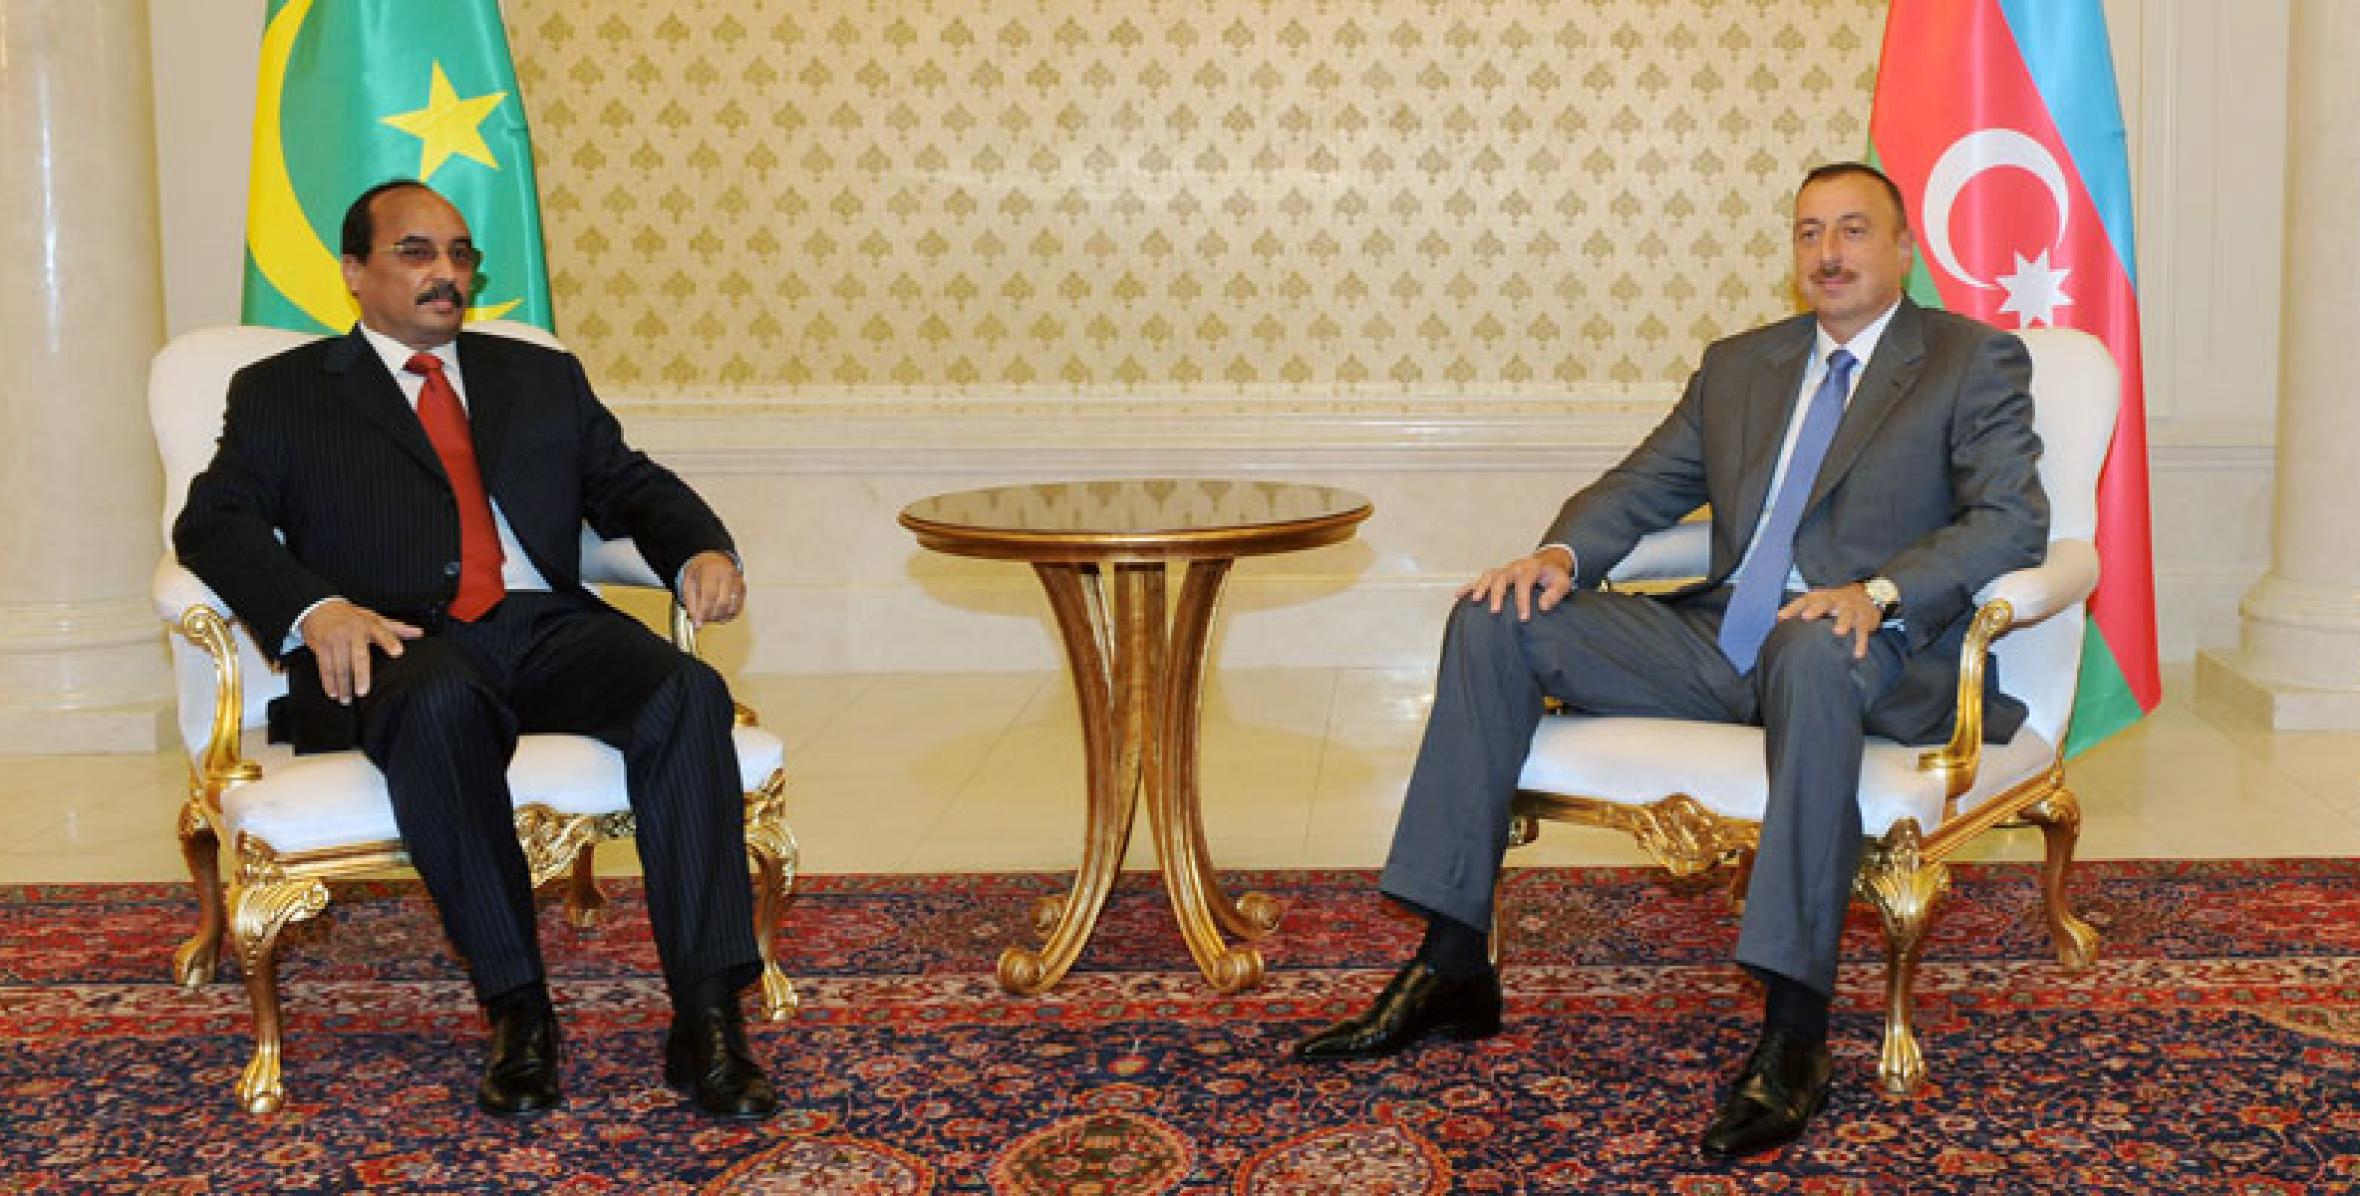 Presidents of Azerbaijan and Mauritania met in private